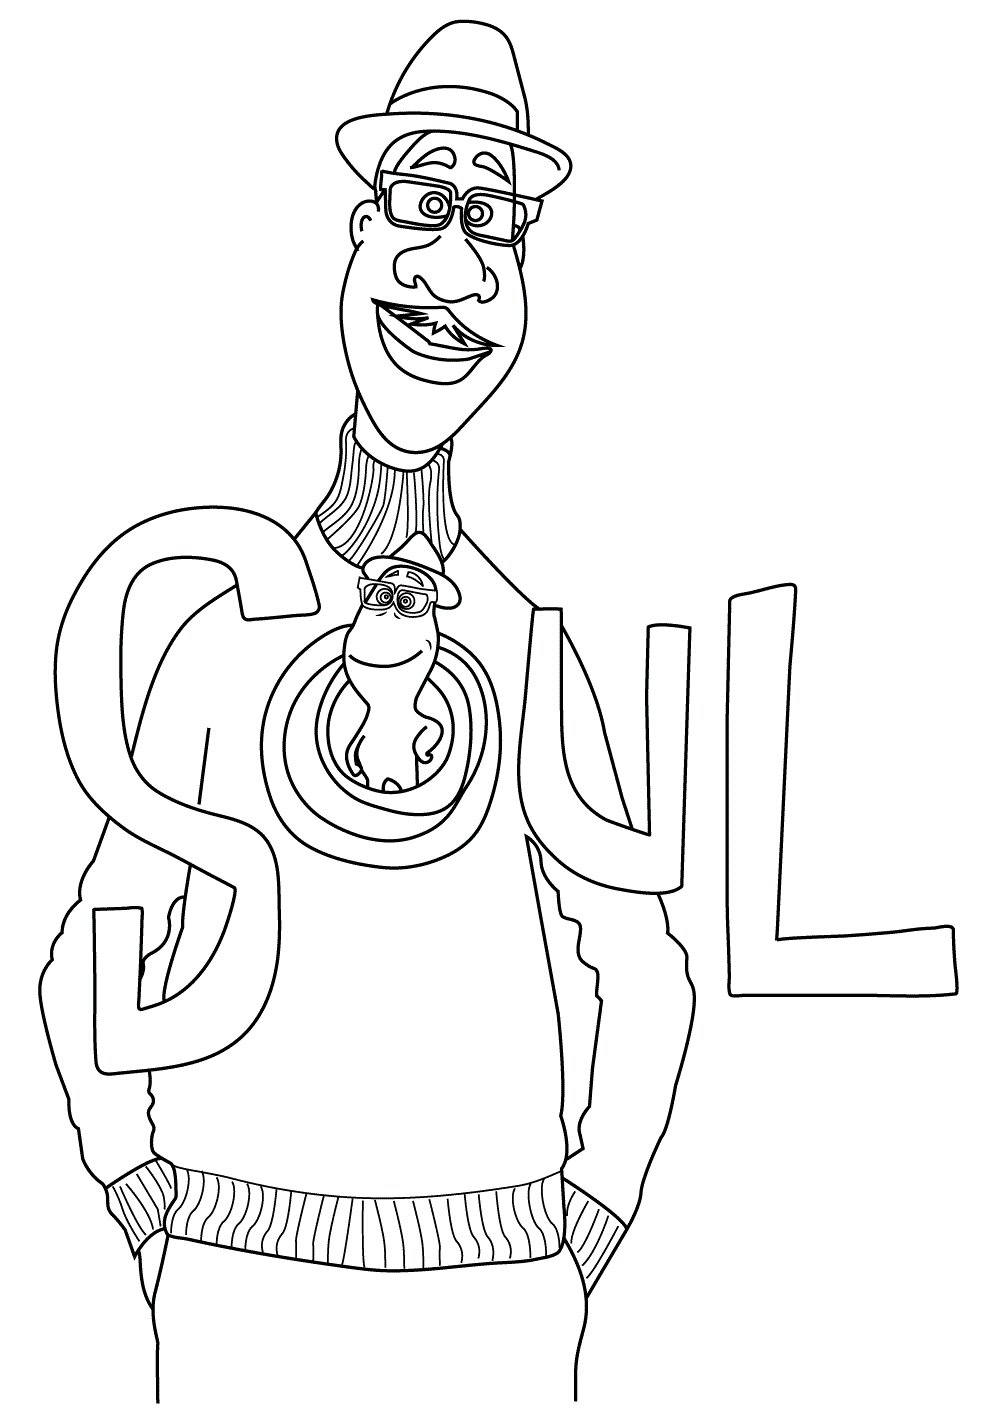 Joe From Soul Coloring Pages